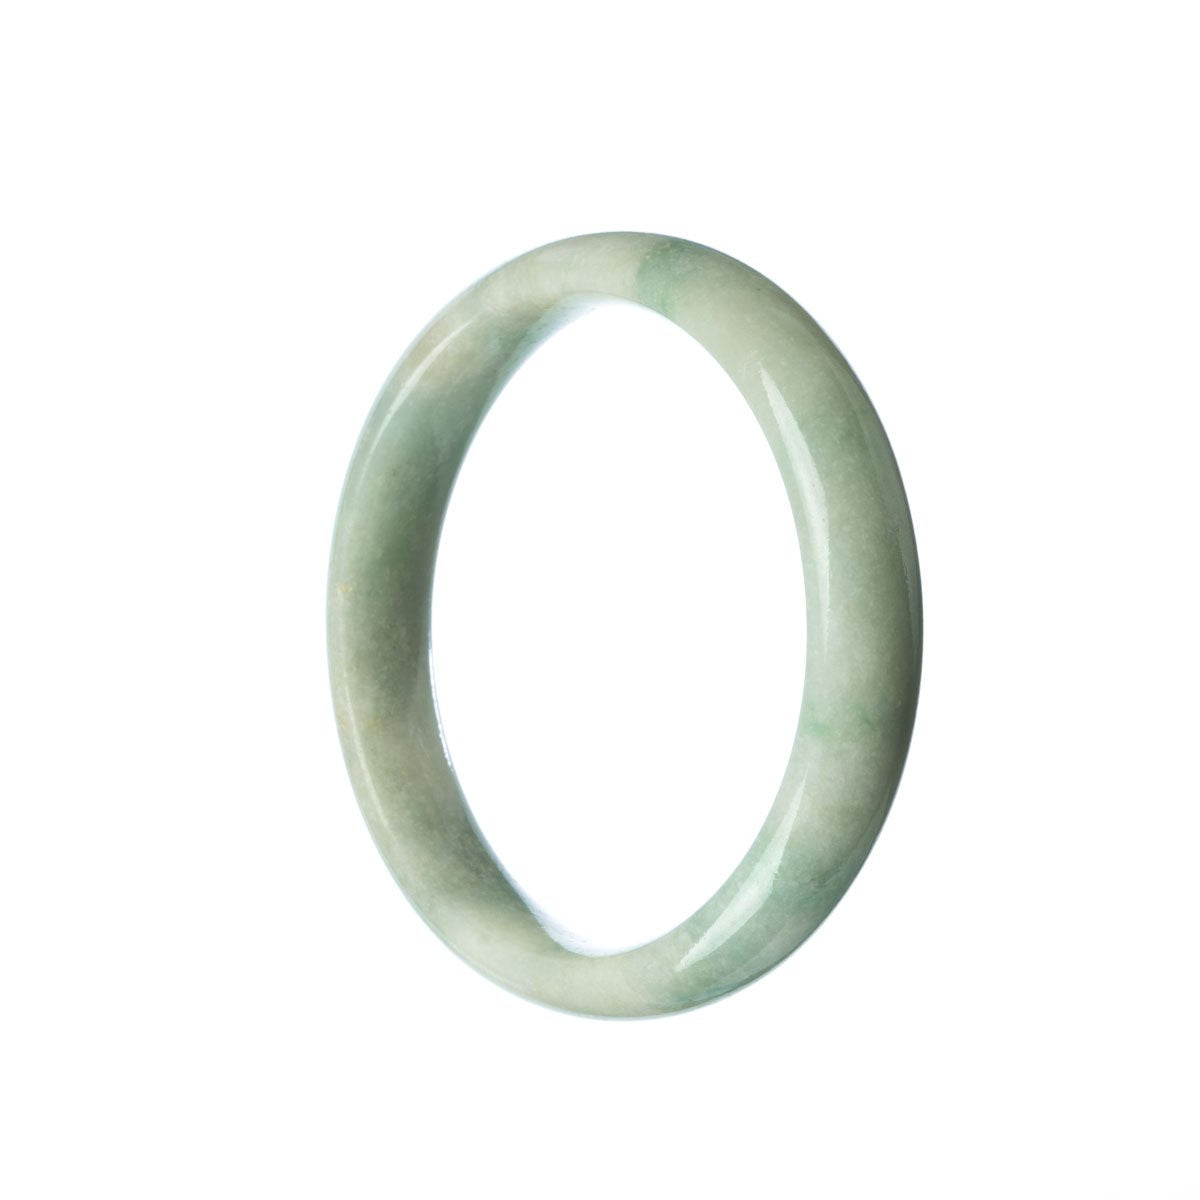 An authentic, high-quality Type A Pale Green Jadeite Jade Bangle Bracelet with a half moon design. Perfect for adding a touch of elegance to any outfit.